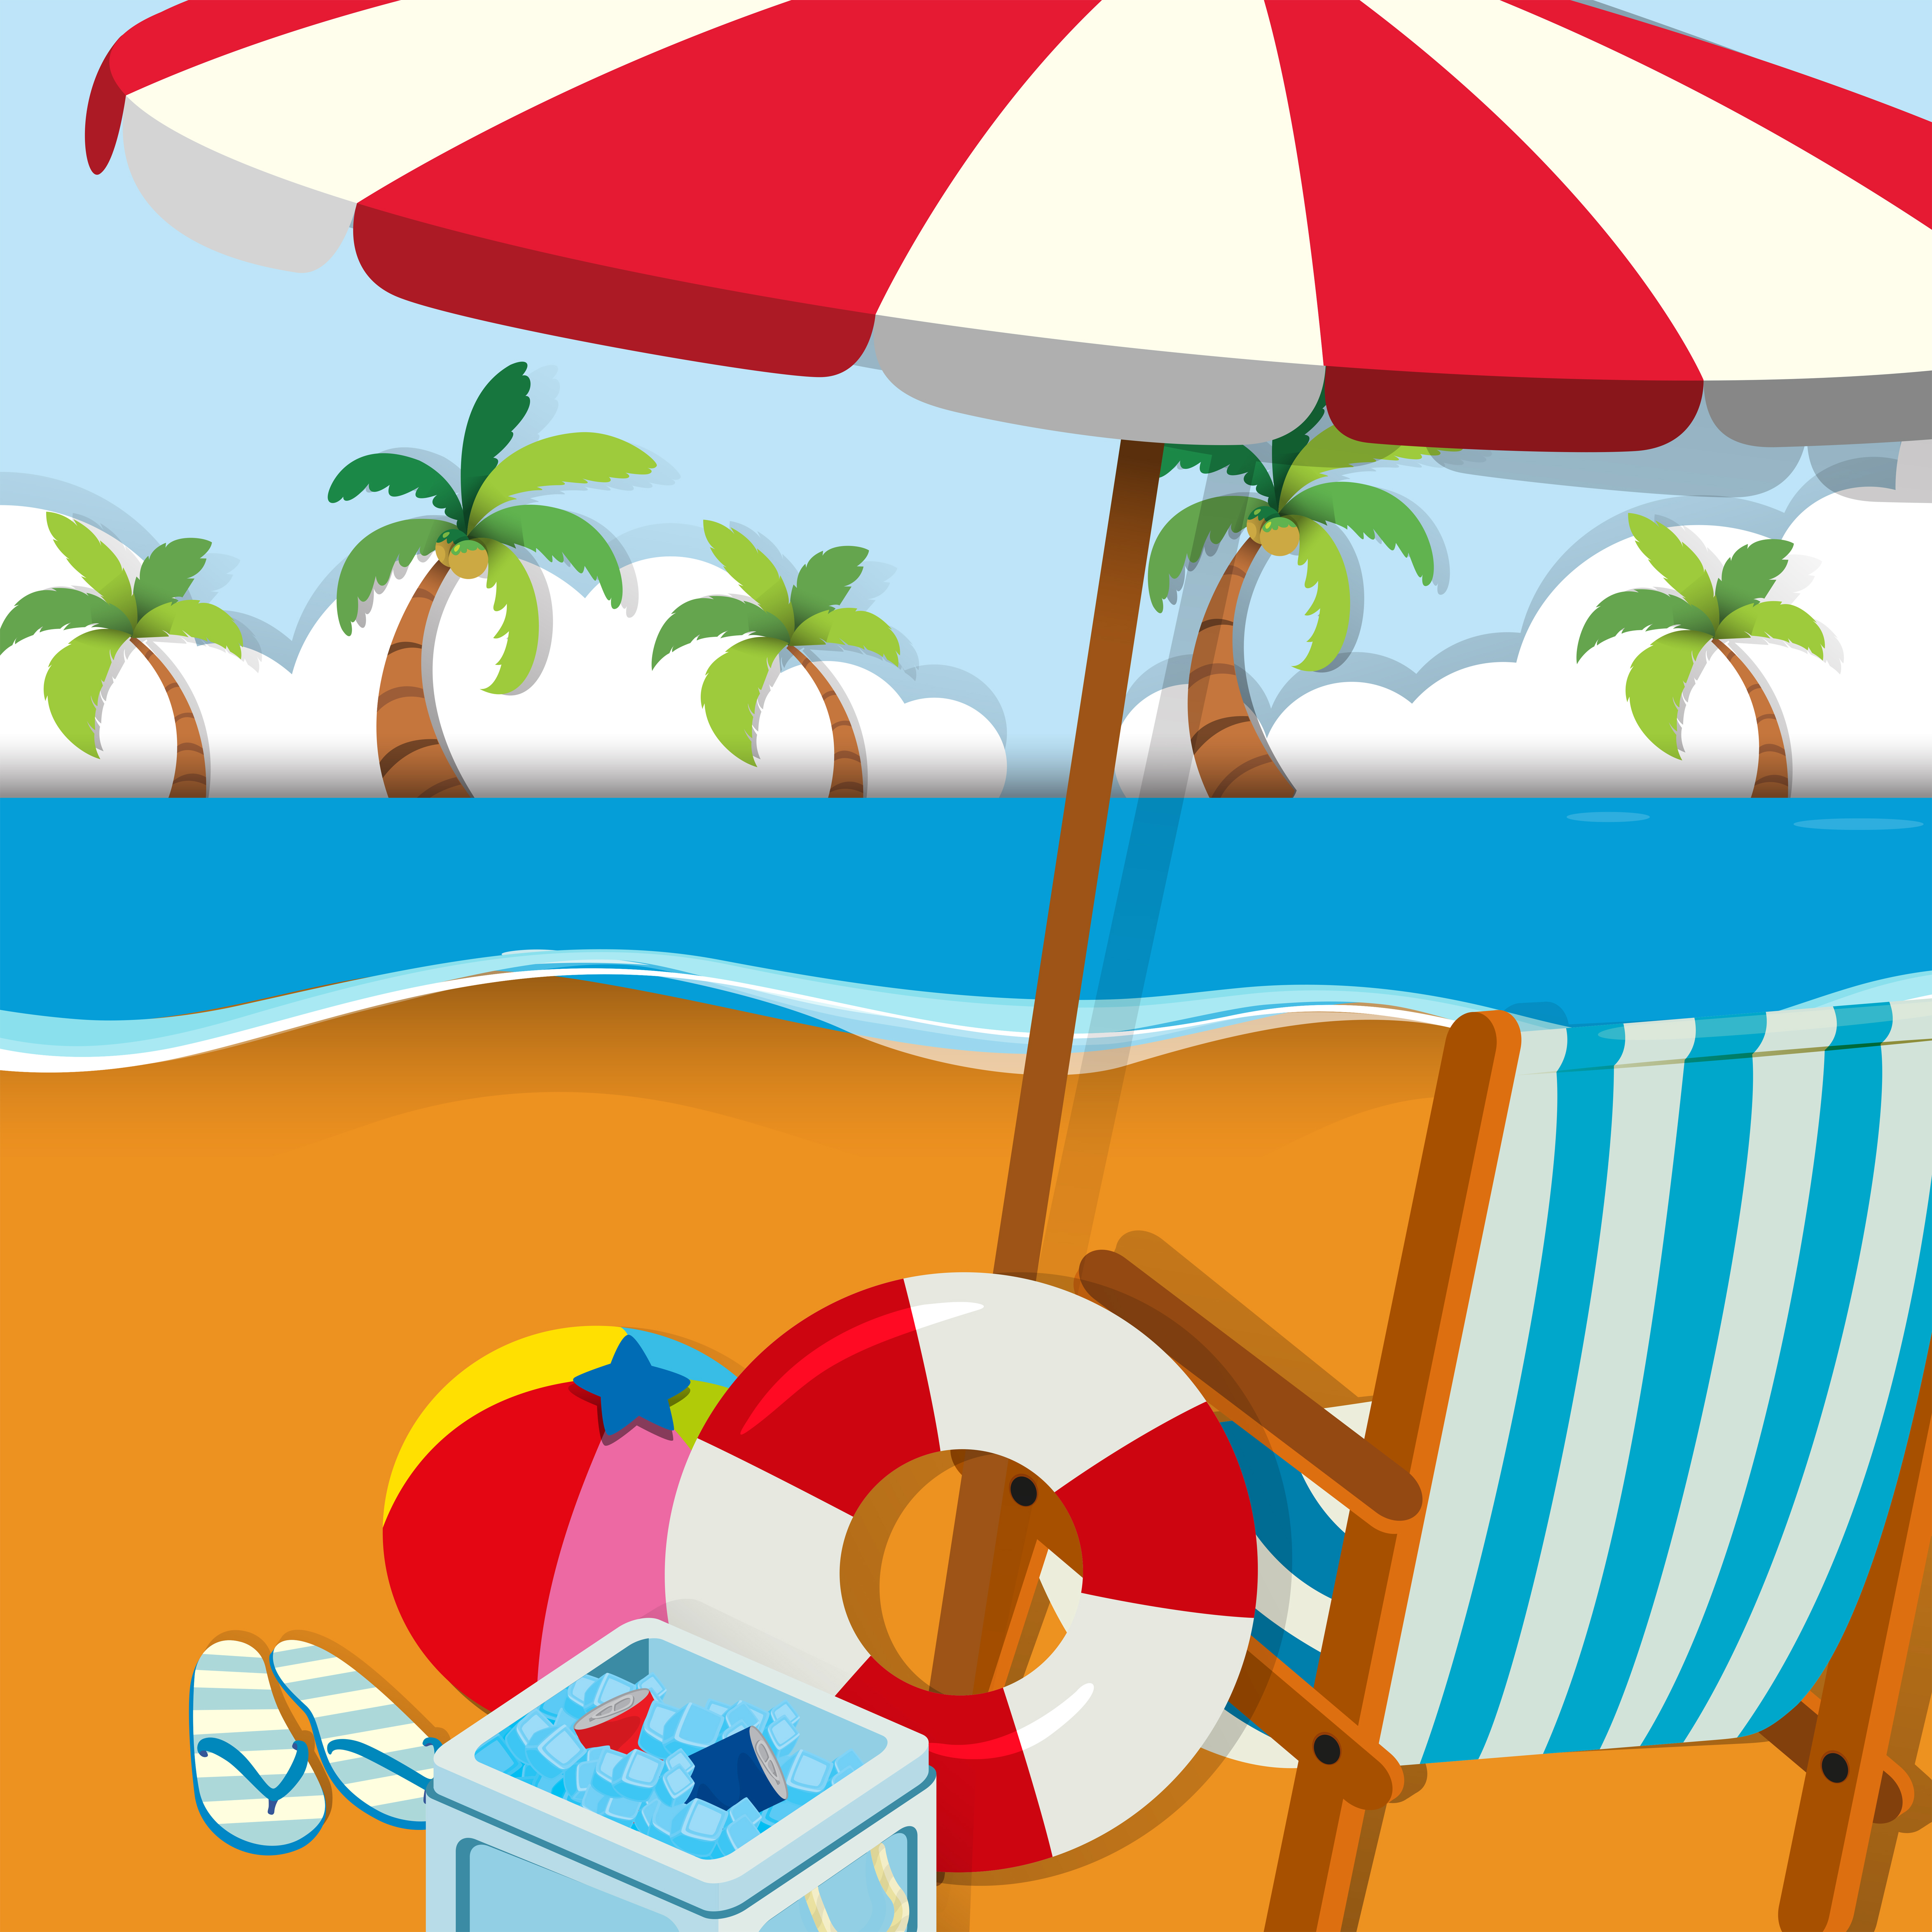 Chair And Umbrella On The Beach Download Free Vectors